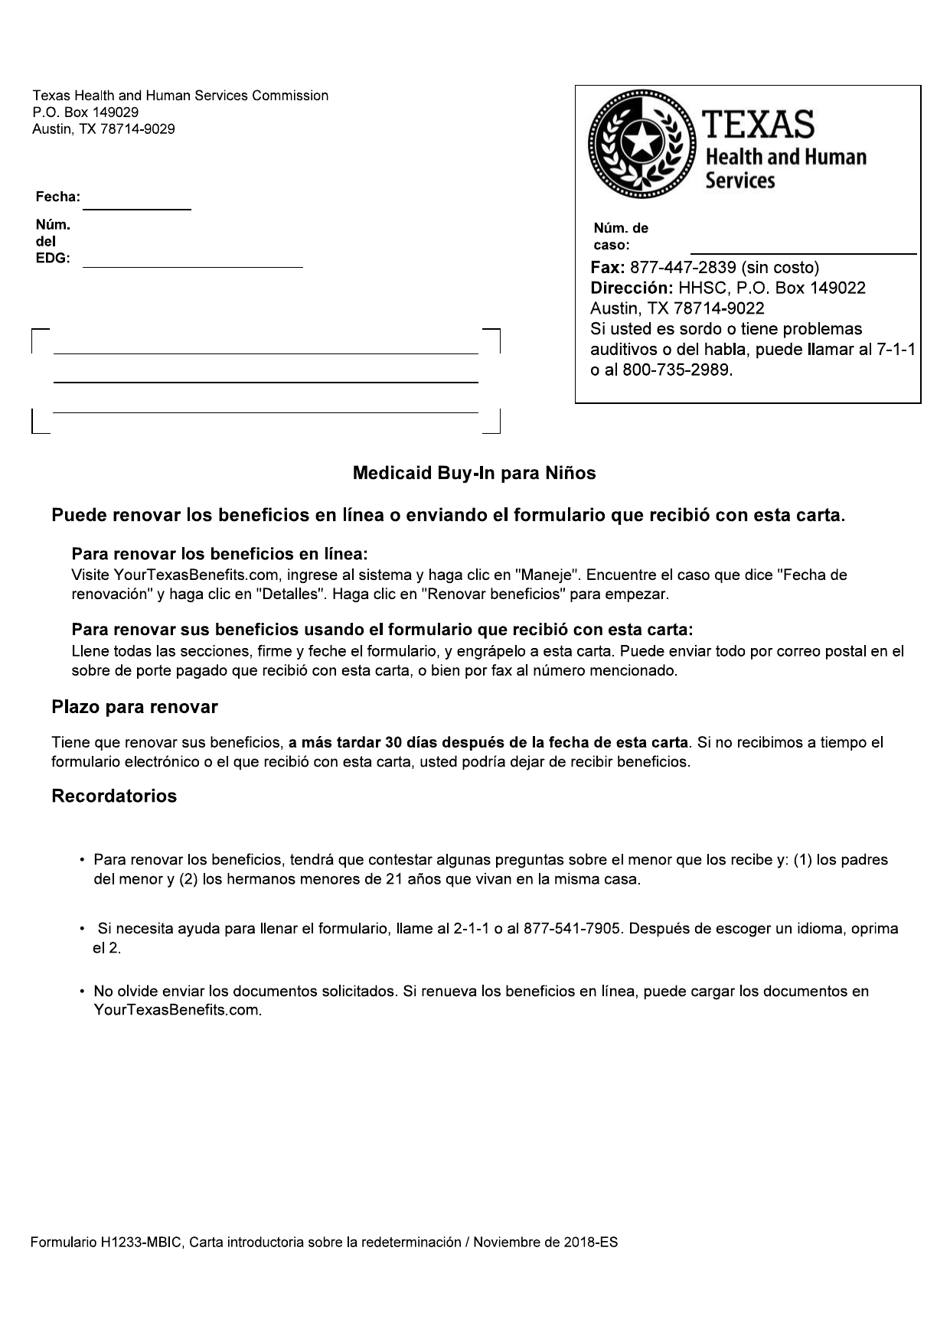 Formulario H1233-MBIC-S Redetermination Cover Letter (Medicaid Buy-In for Children) - Texas (Spanish), Page 1